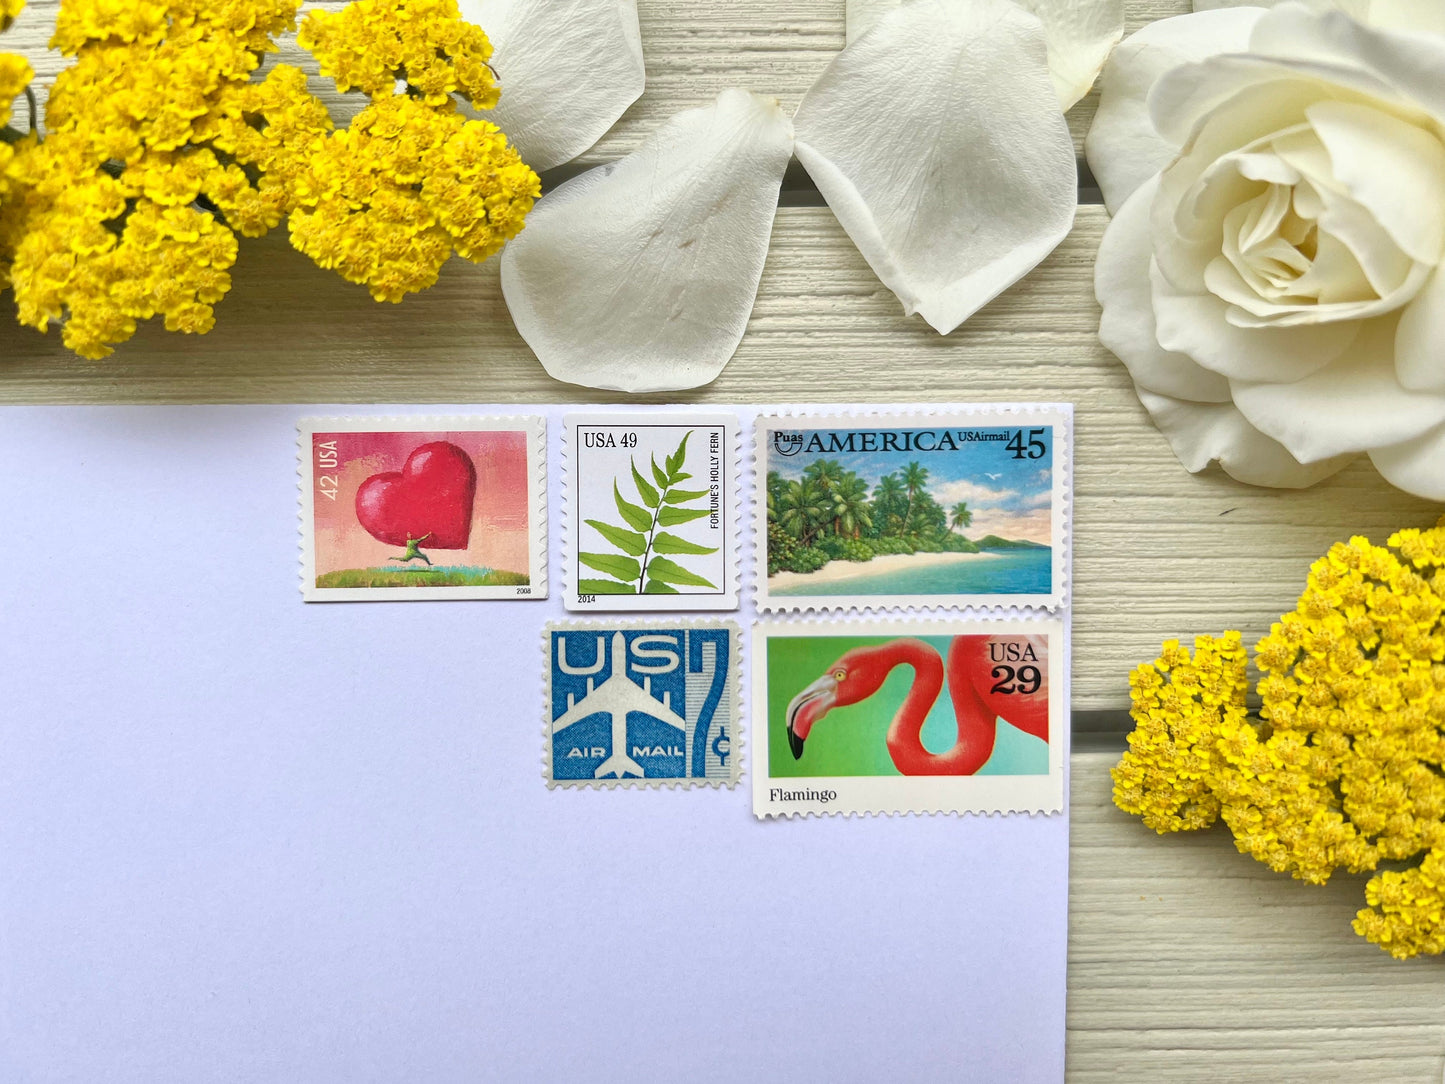 Yipee! Brand-New Pretty Postage for Your Wedding Invitations! Because  Wedding Invites With Flag Stamps Are Just Sad